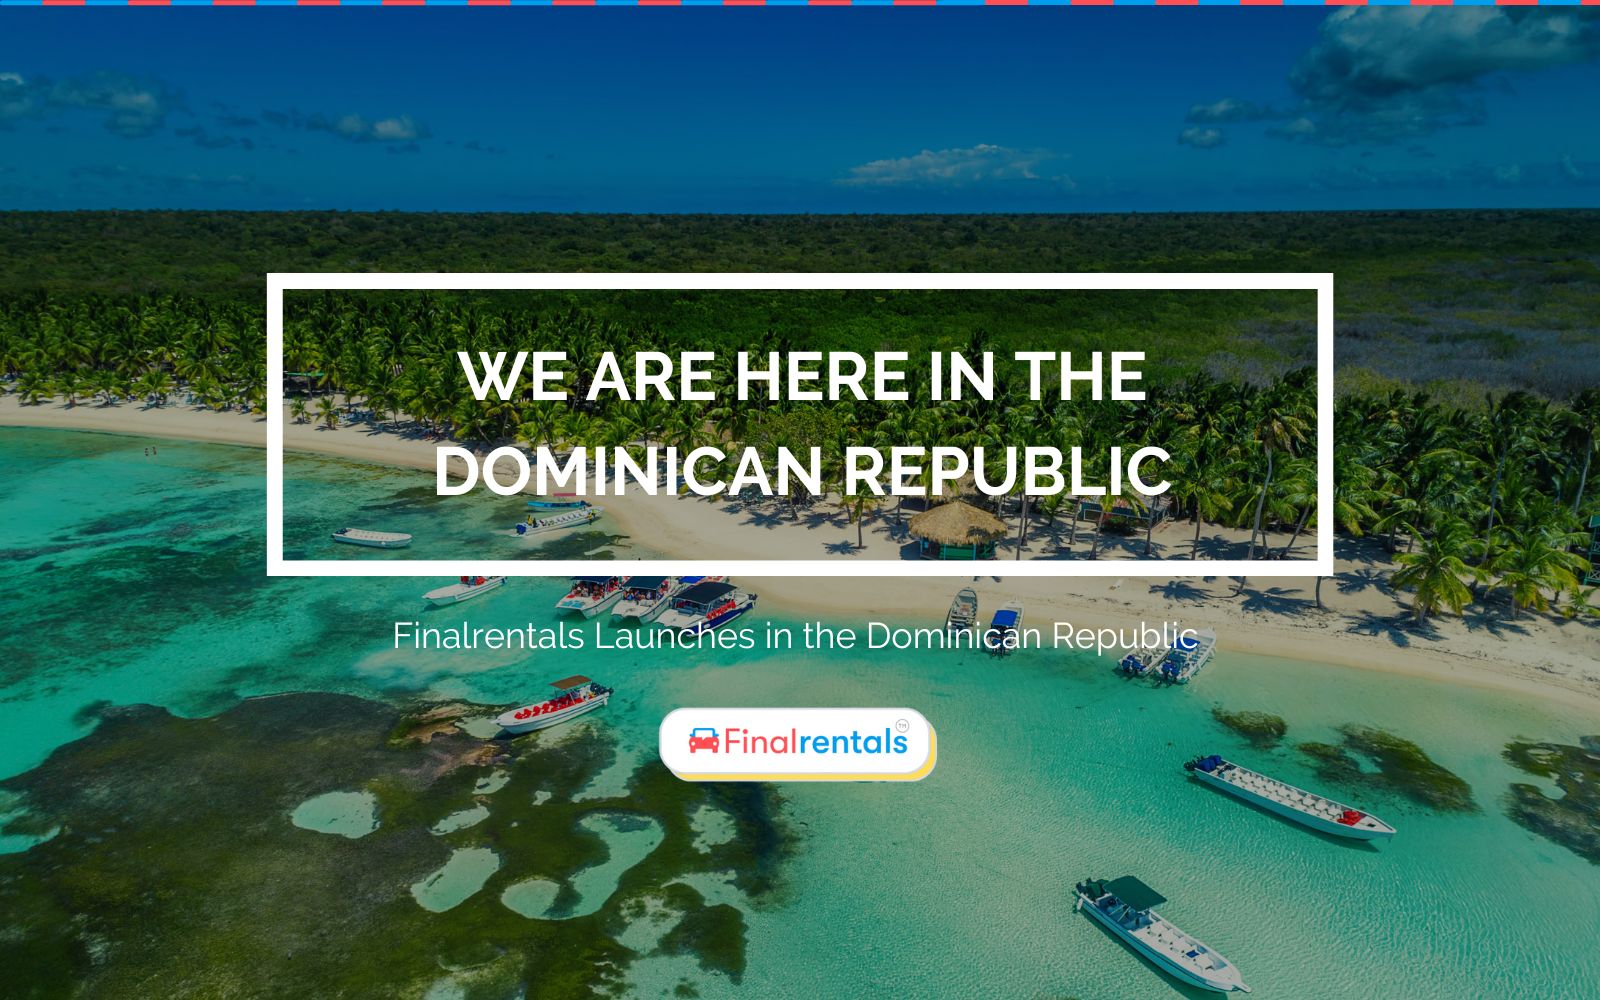 Finalrentals Launches in the Dominican Republic